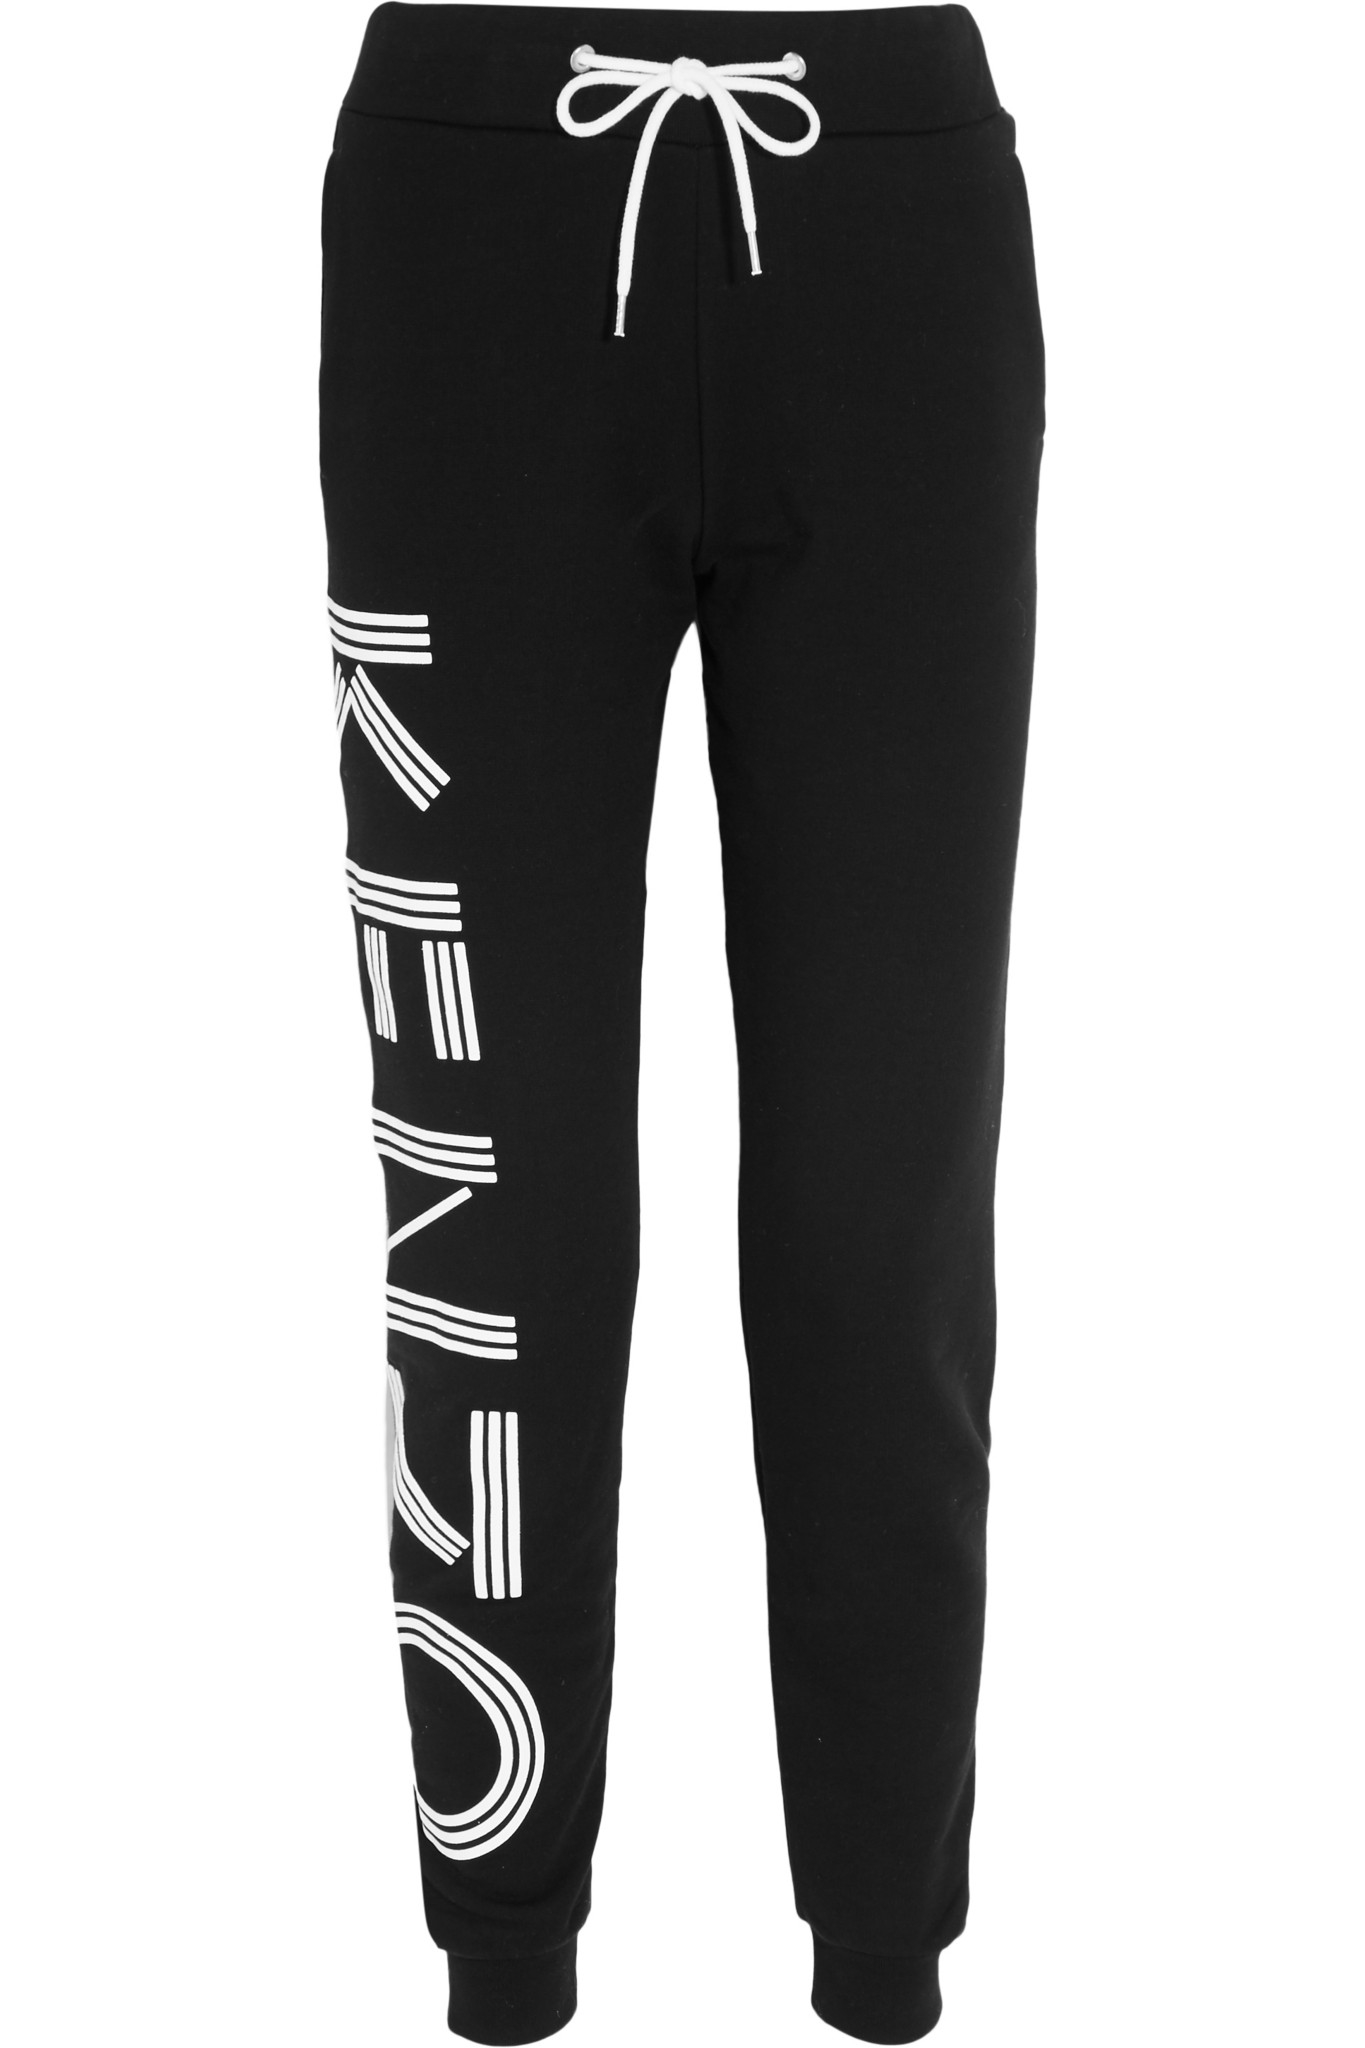 KENZO Printed Cotton Track Pants in Black - Lyst